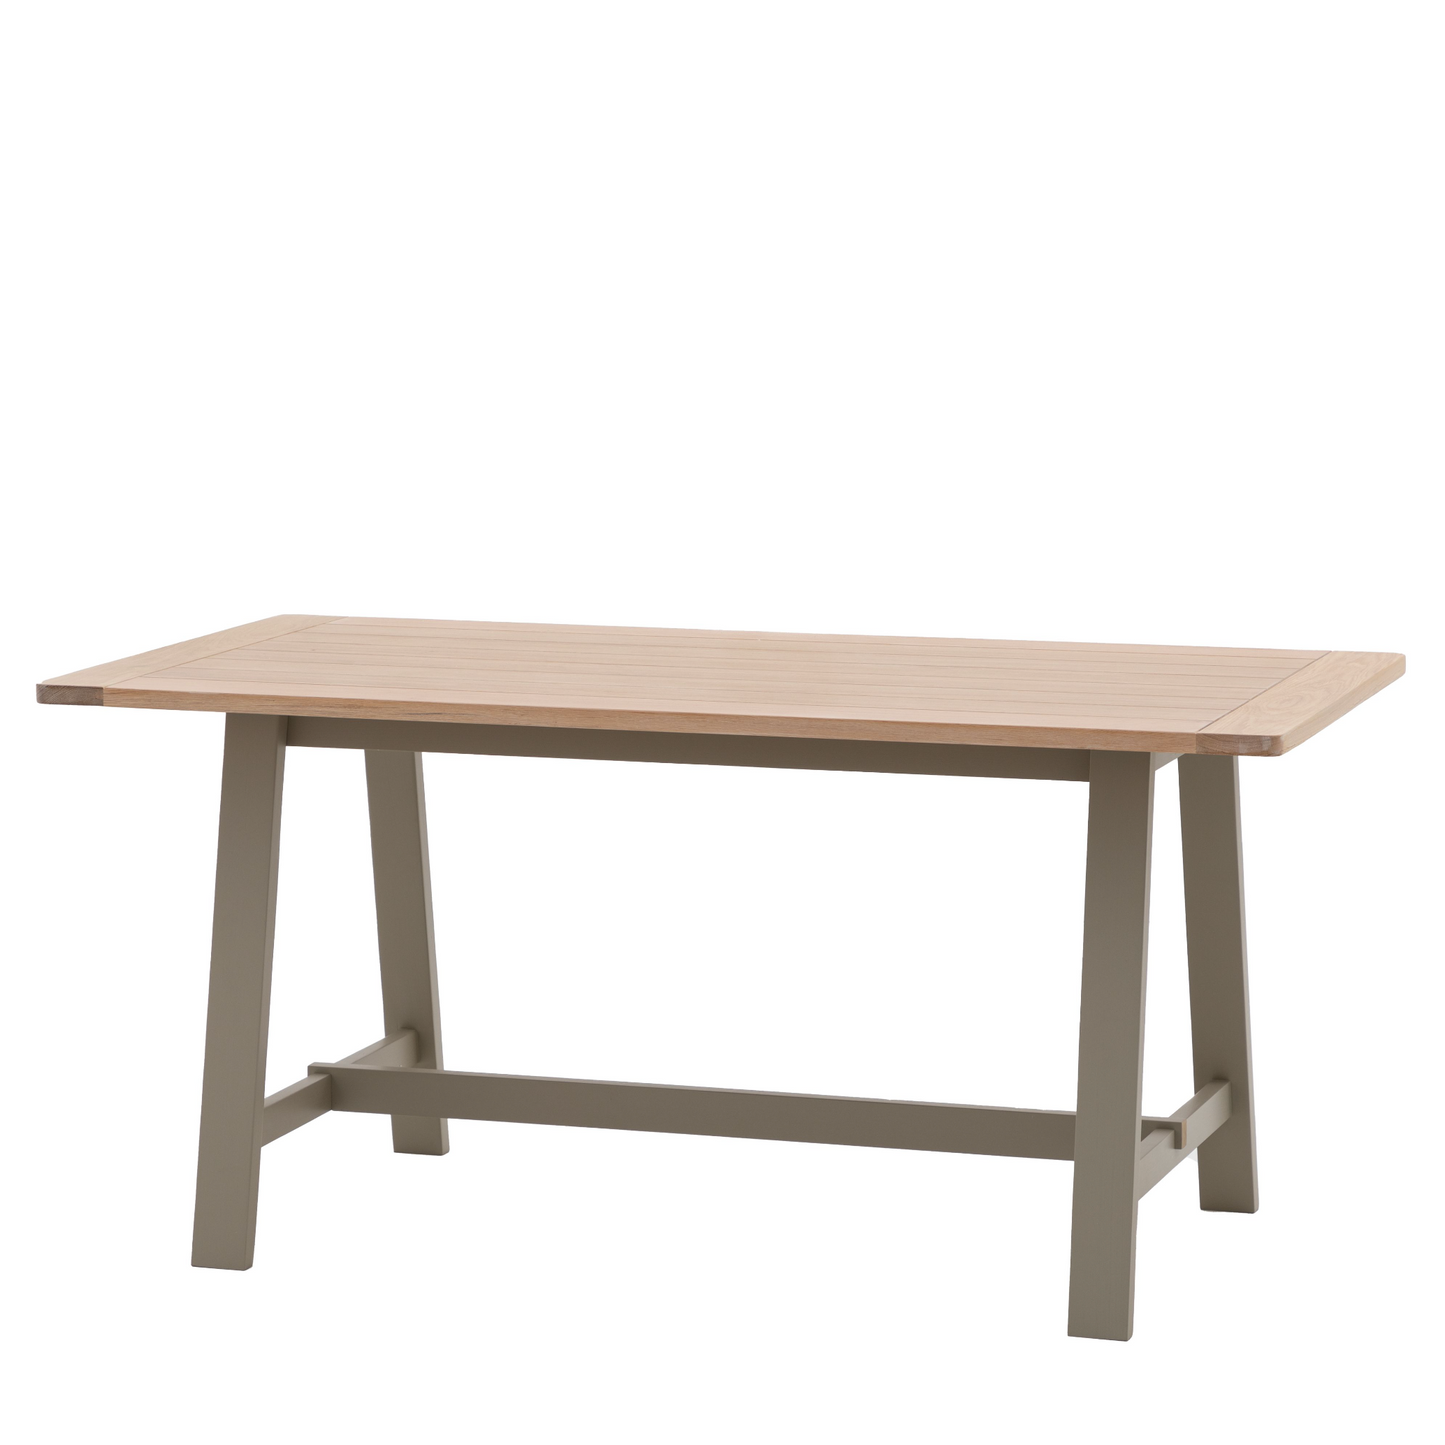 A Buckland Trestle Table in Prairie by Kikiathome.co.uk, perfect for interior decor or home furniture.